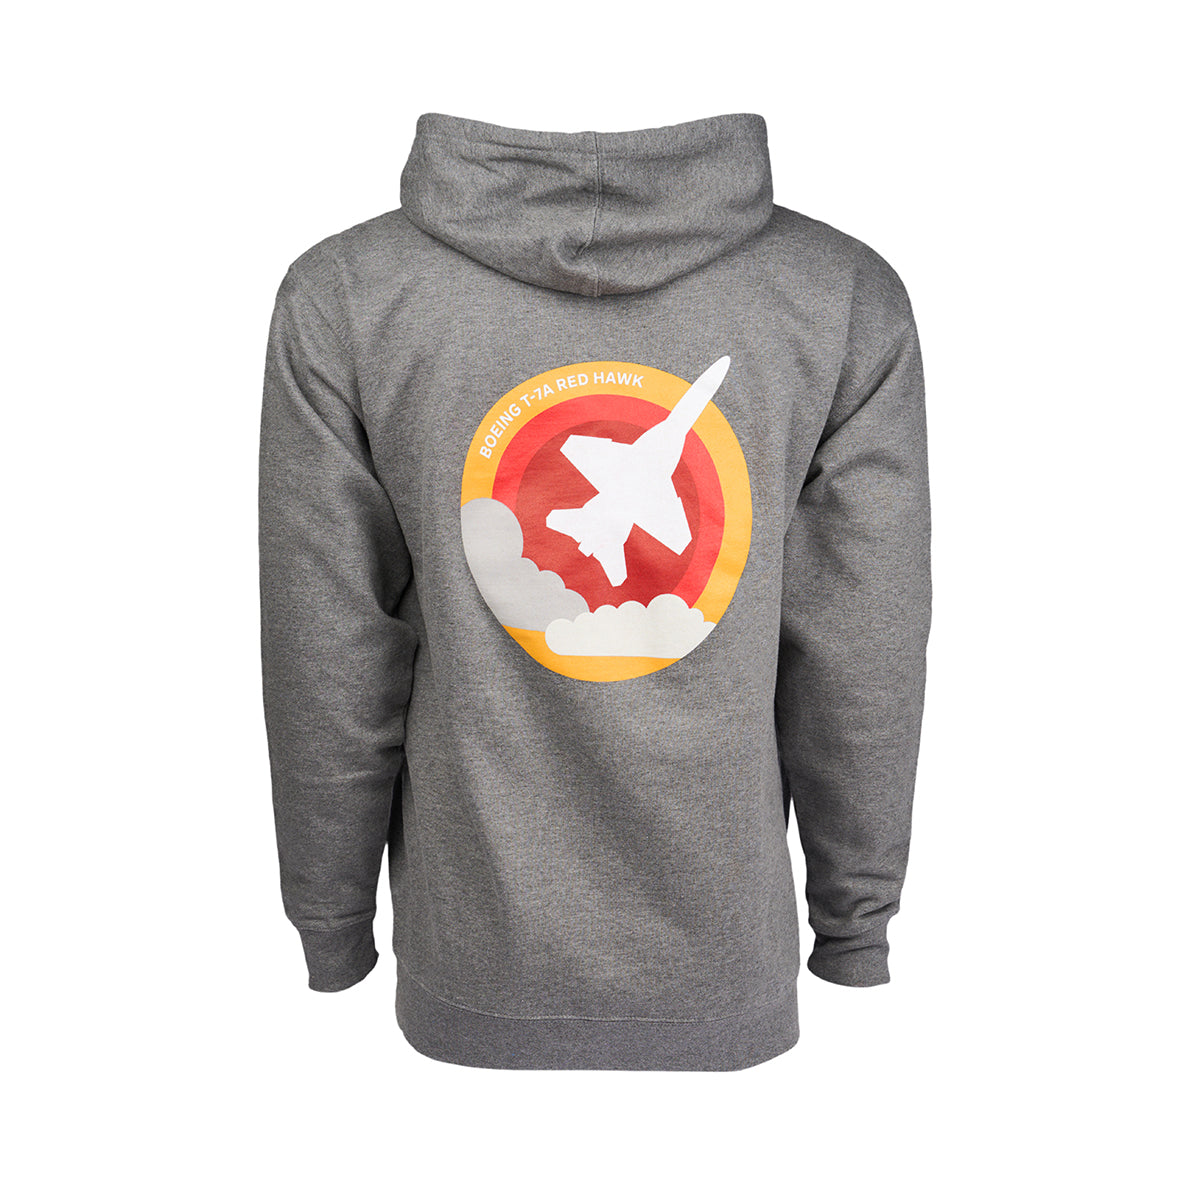 Full product image of the back side of the hooded sweatshirt in a grey color.  Showing the Skyward graphic of the Boeing T-7A Red Hawk.